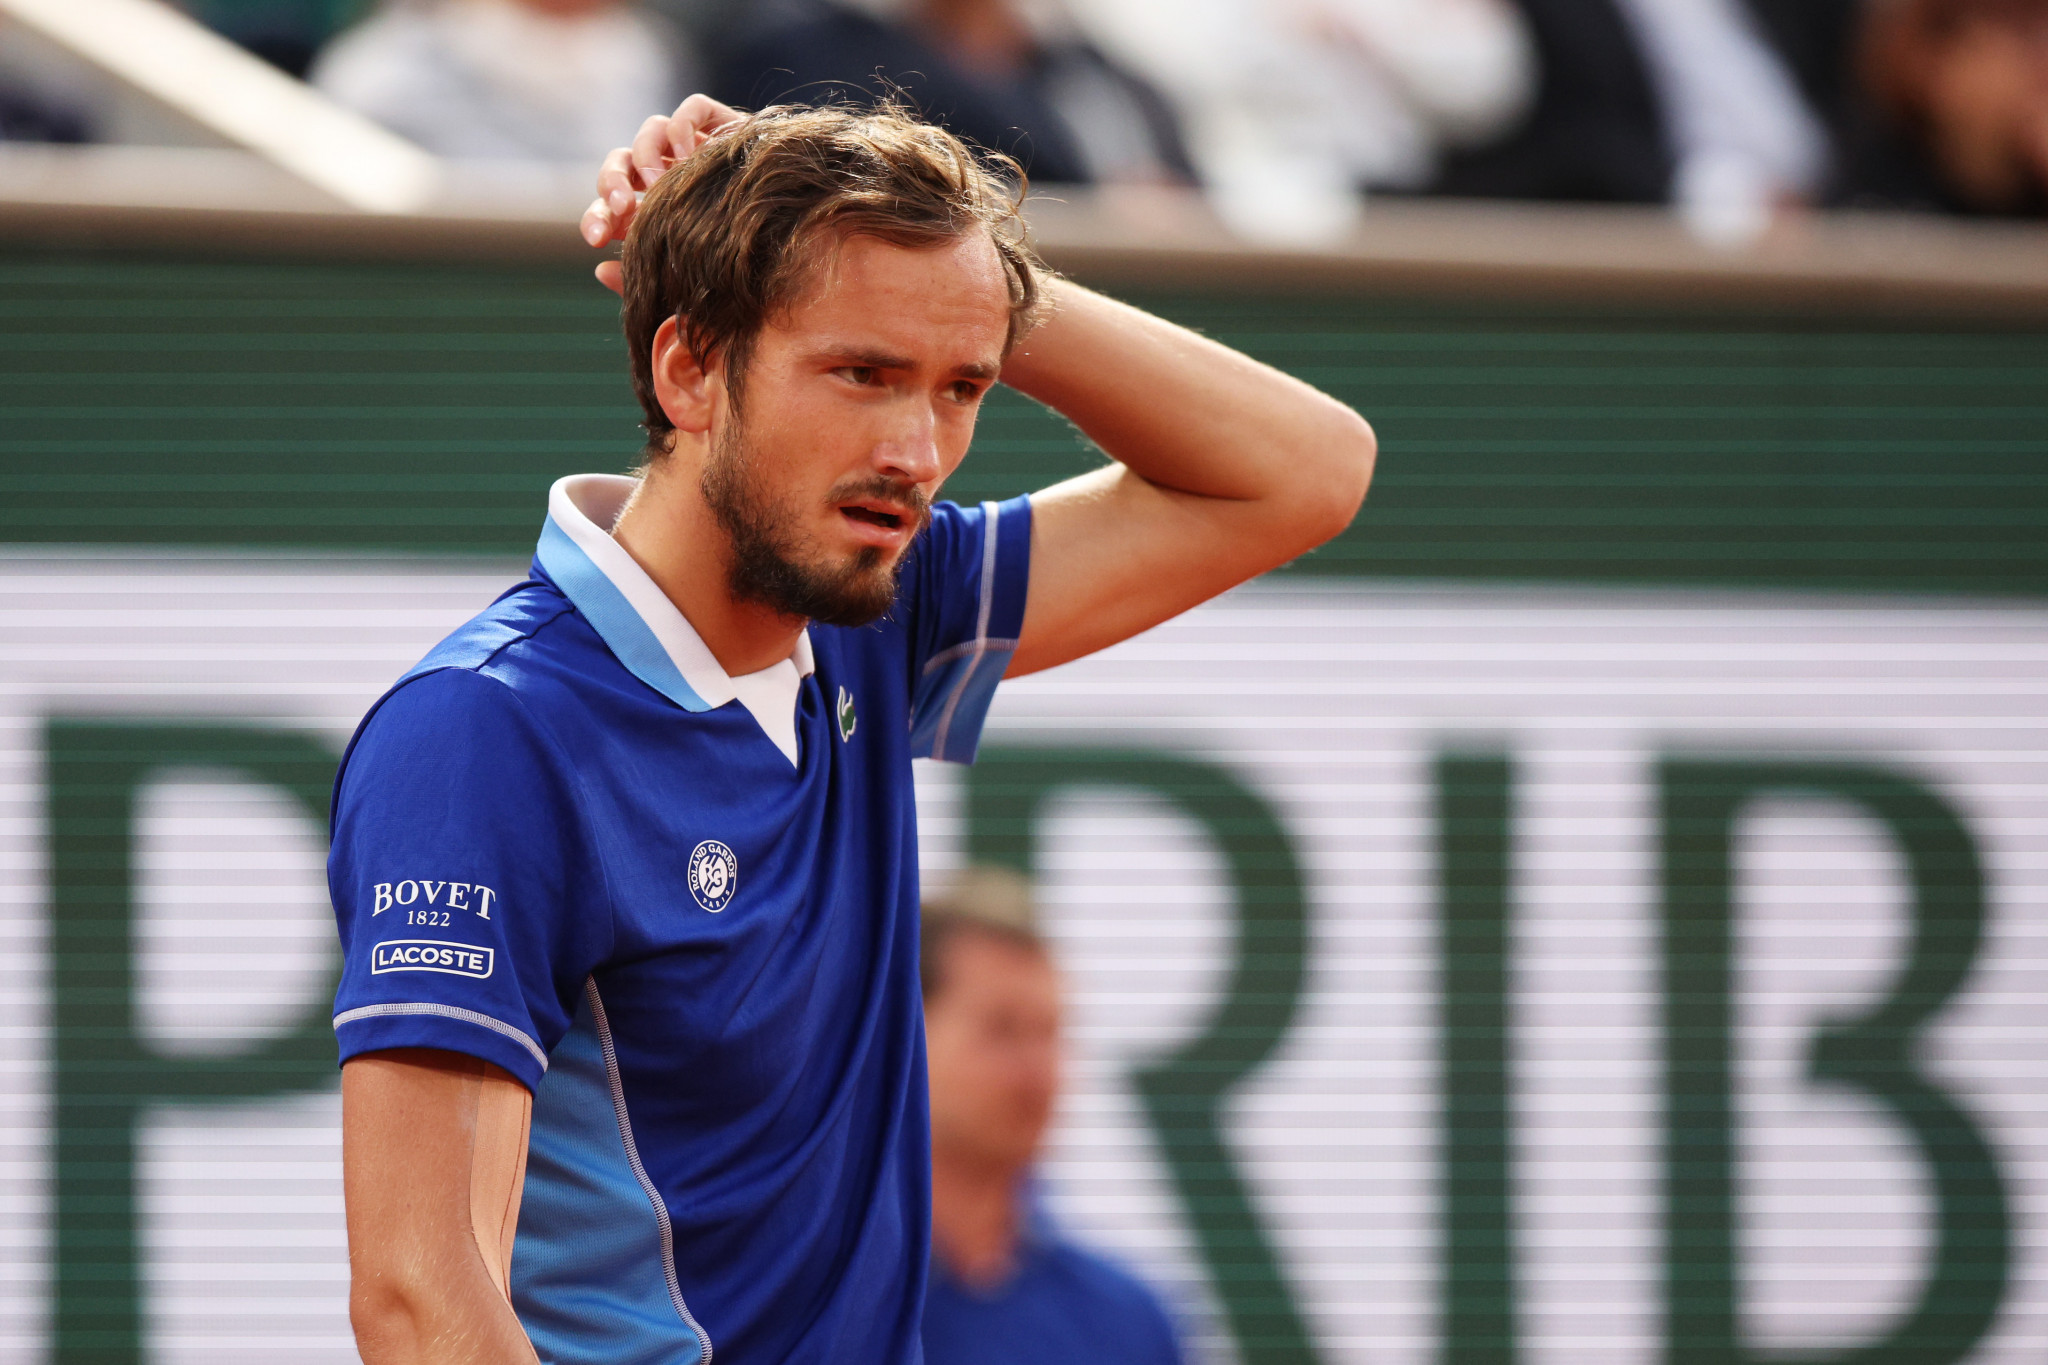 Medvedev and Tsitsipas eliminated on dramatic day of men’s singles action at French Open